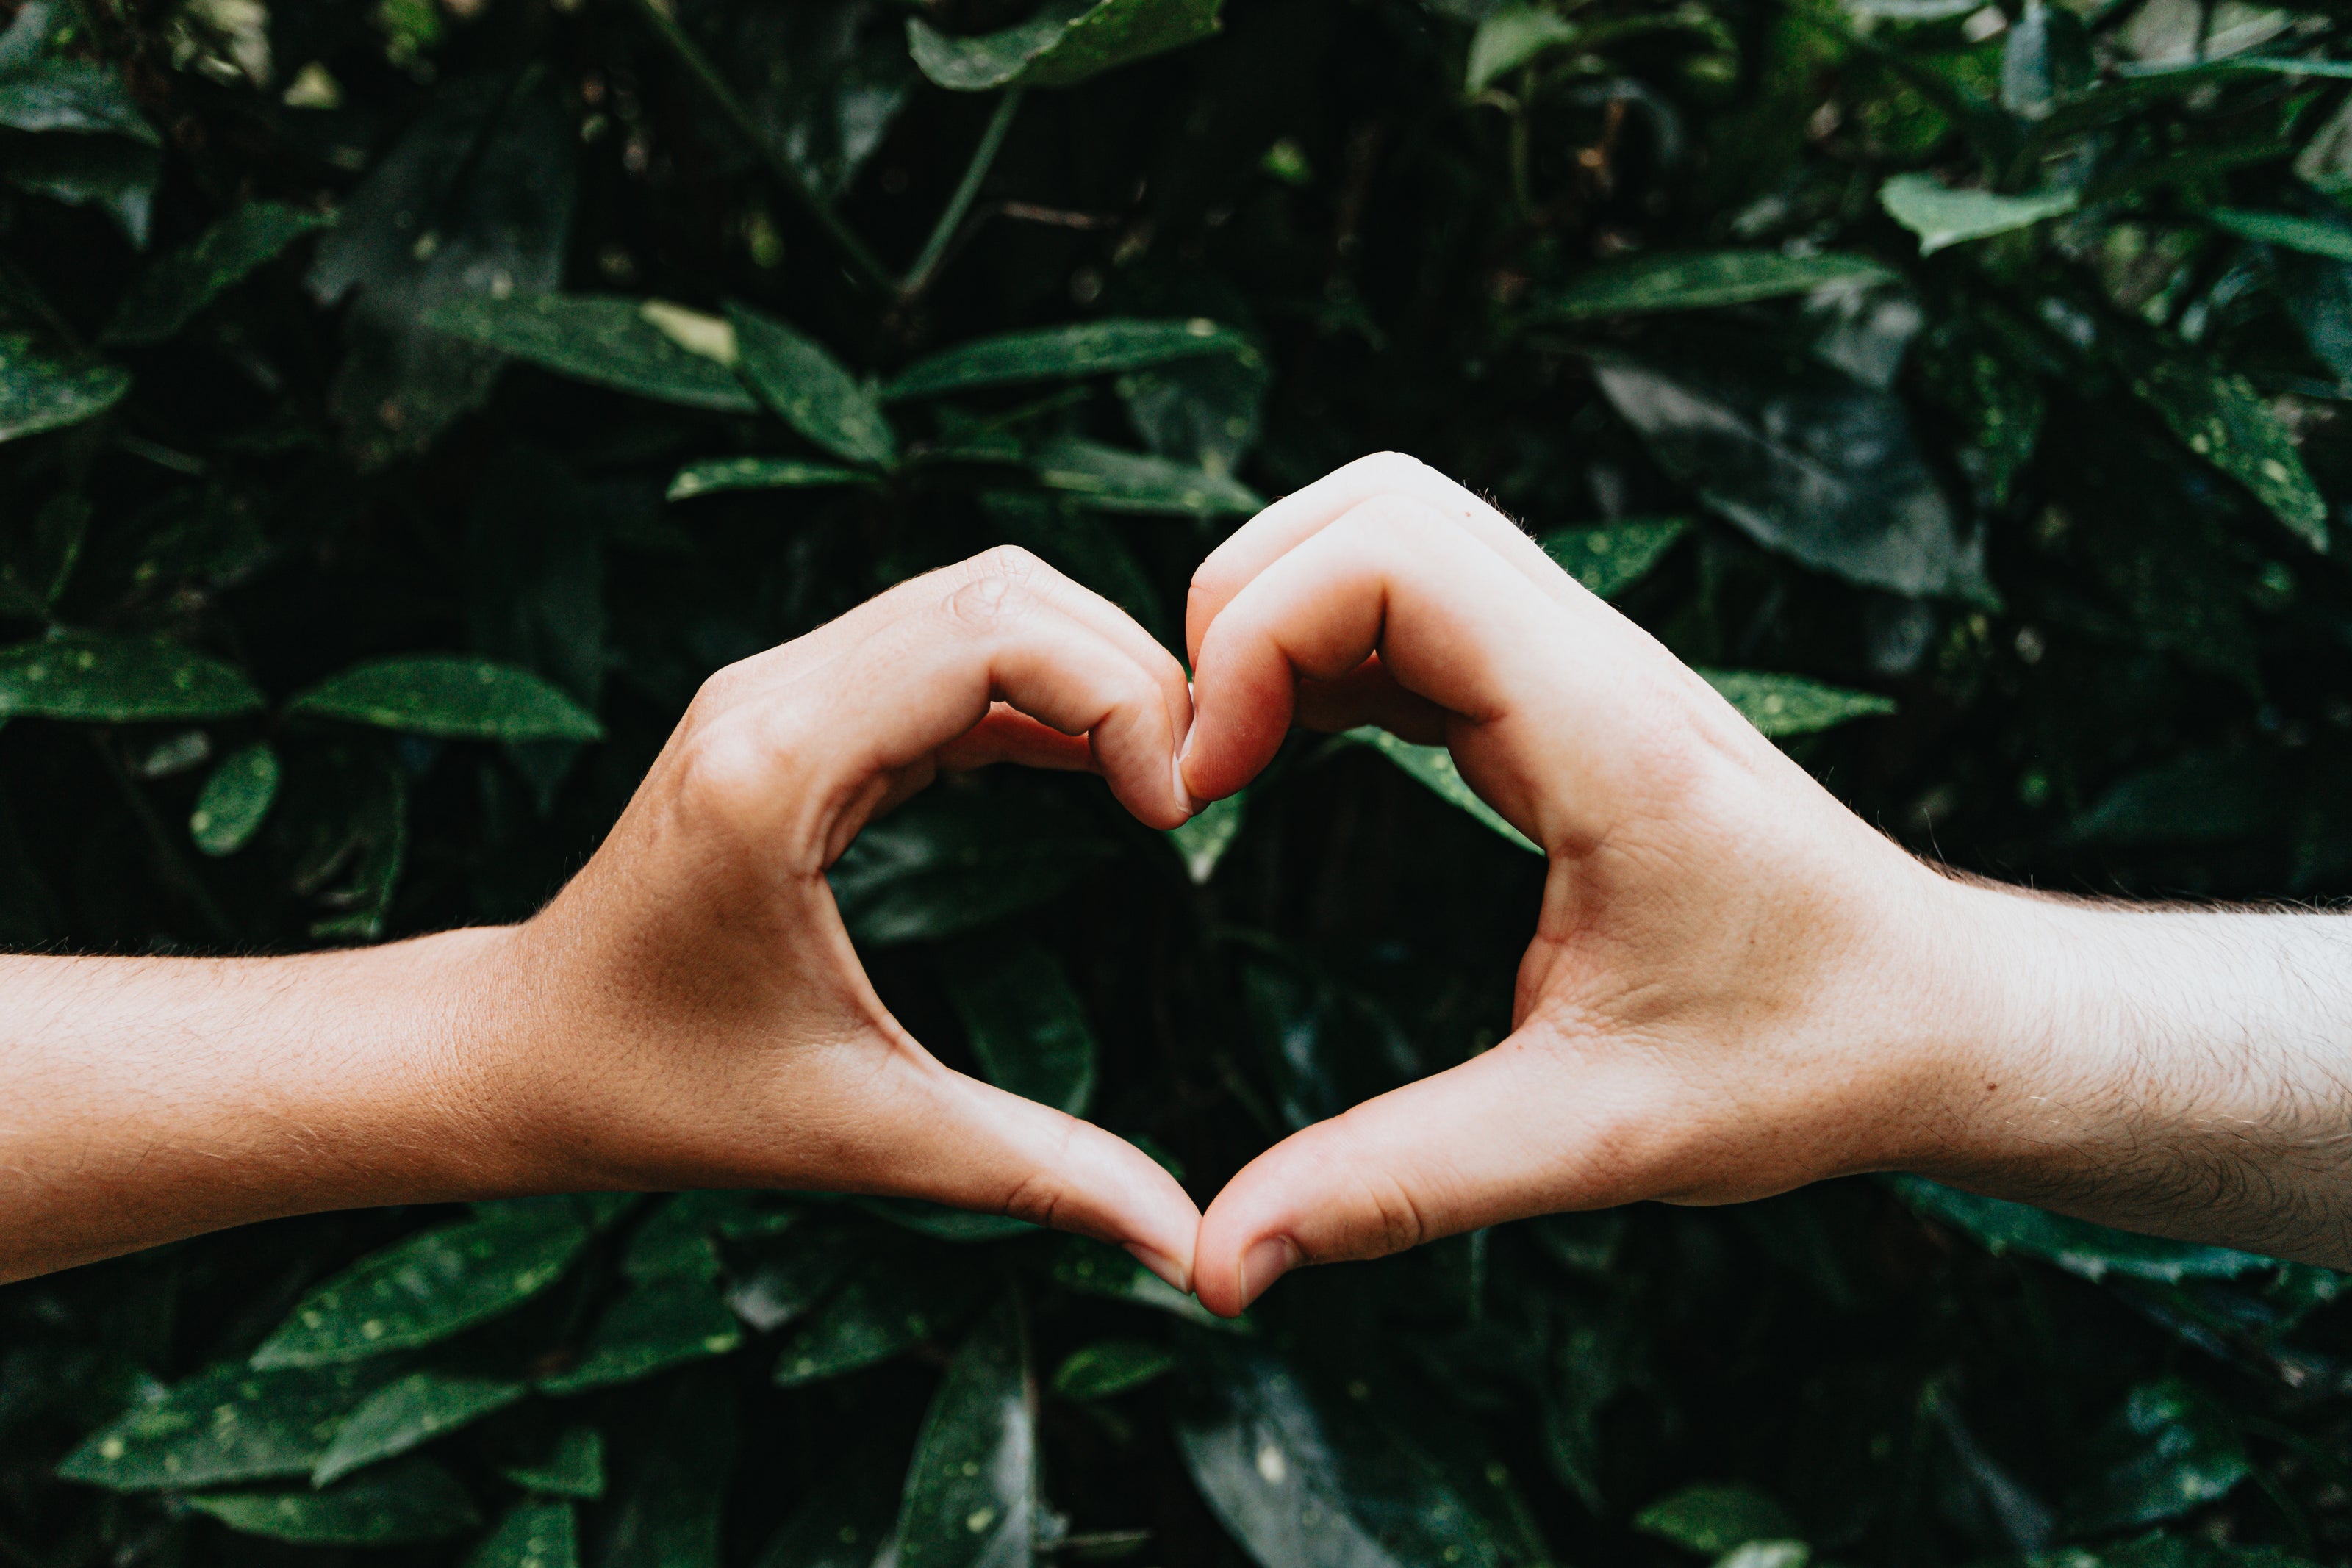 hands-form-a-heart-shape-against-green-leaves